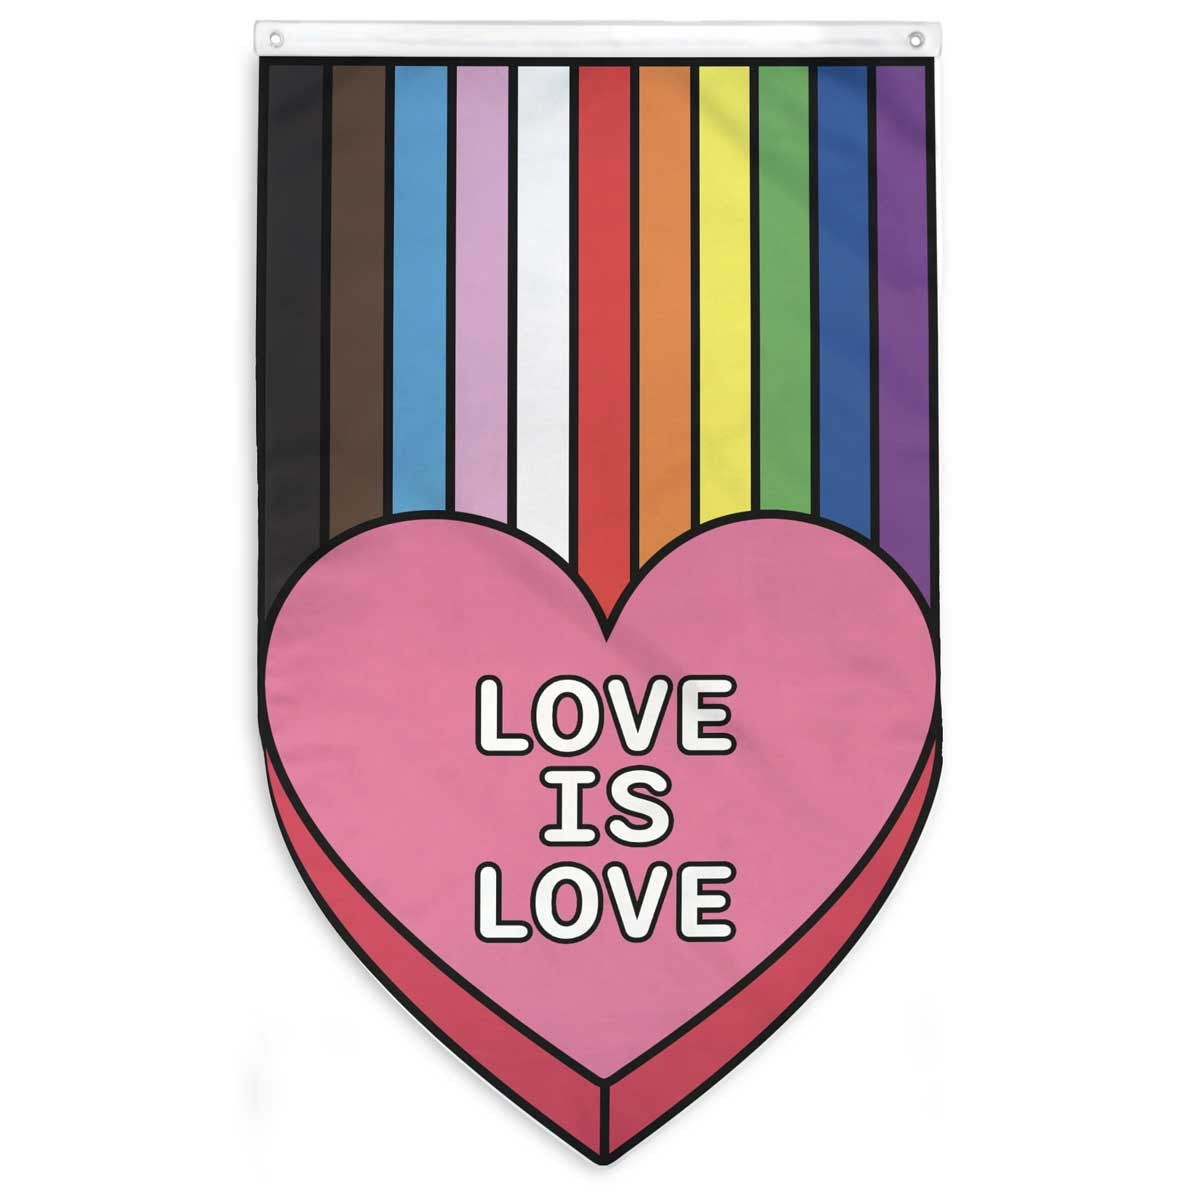 Love is love heart rainbow flag 3'x5' designed by flags for good